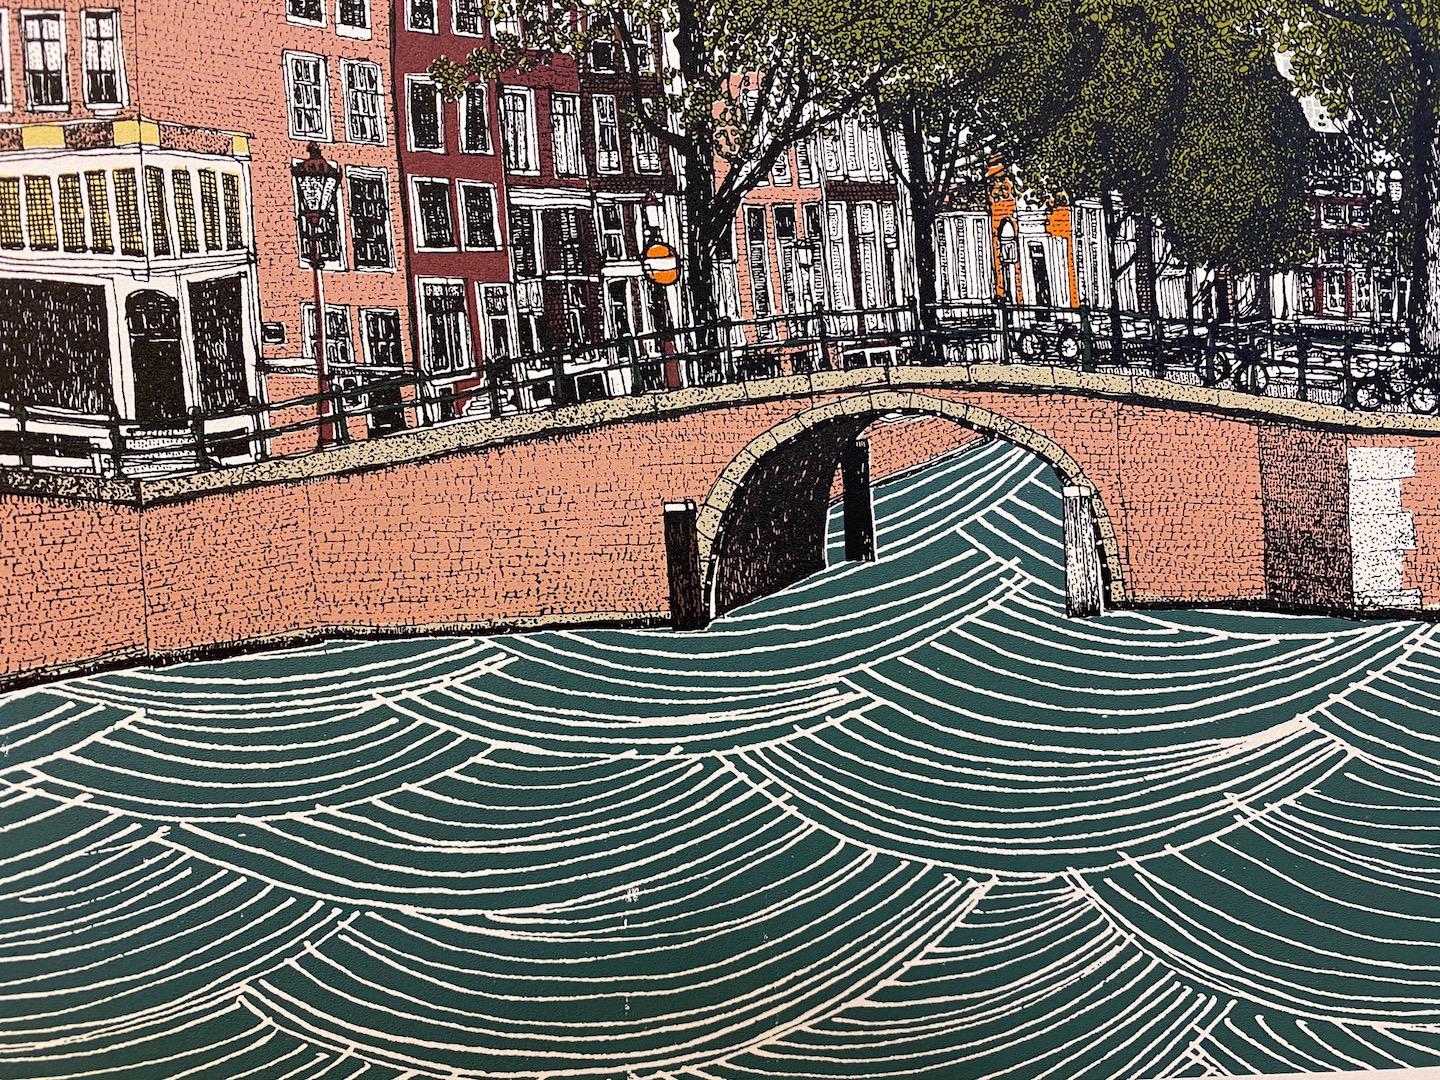 Clare Halifax
Canal Ring, Amsterdam
Limited Edition 10 Colour Silkscreen Print
Edition of 50
Image size H 35 x 35cm
Sheet Size: H 38 x W 37 cm x D 0.1cm
Sold Unframed
Please note that in situ images are purely an indication of how a piece may